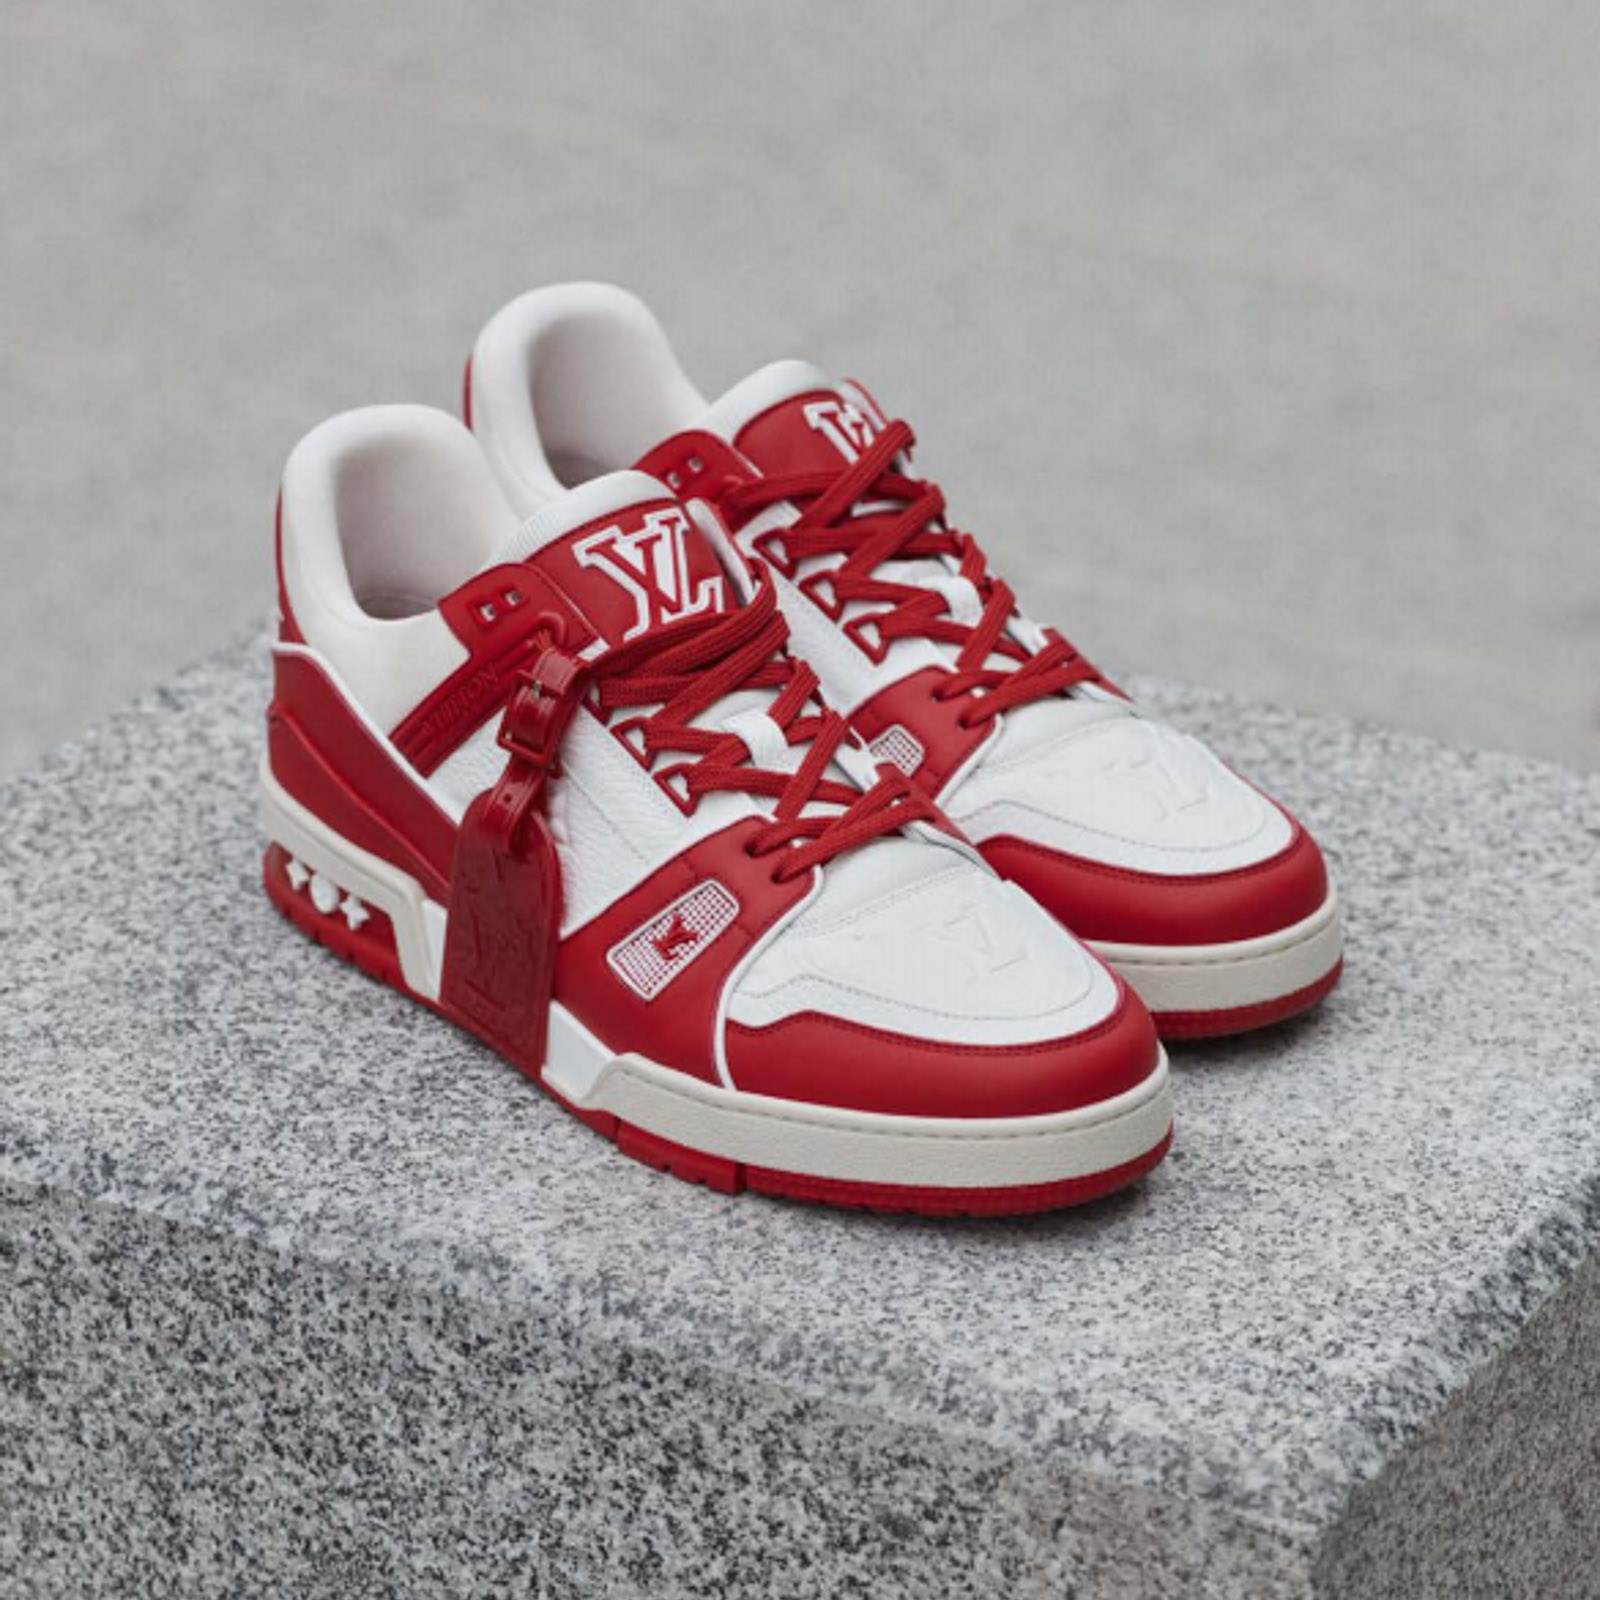 Louis Vuitton, Virgil Abloh and (RED) Join Forces to Fight Pandemics, Sneakers, Sports Memorabilia & Modern Collectibles